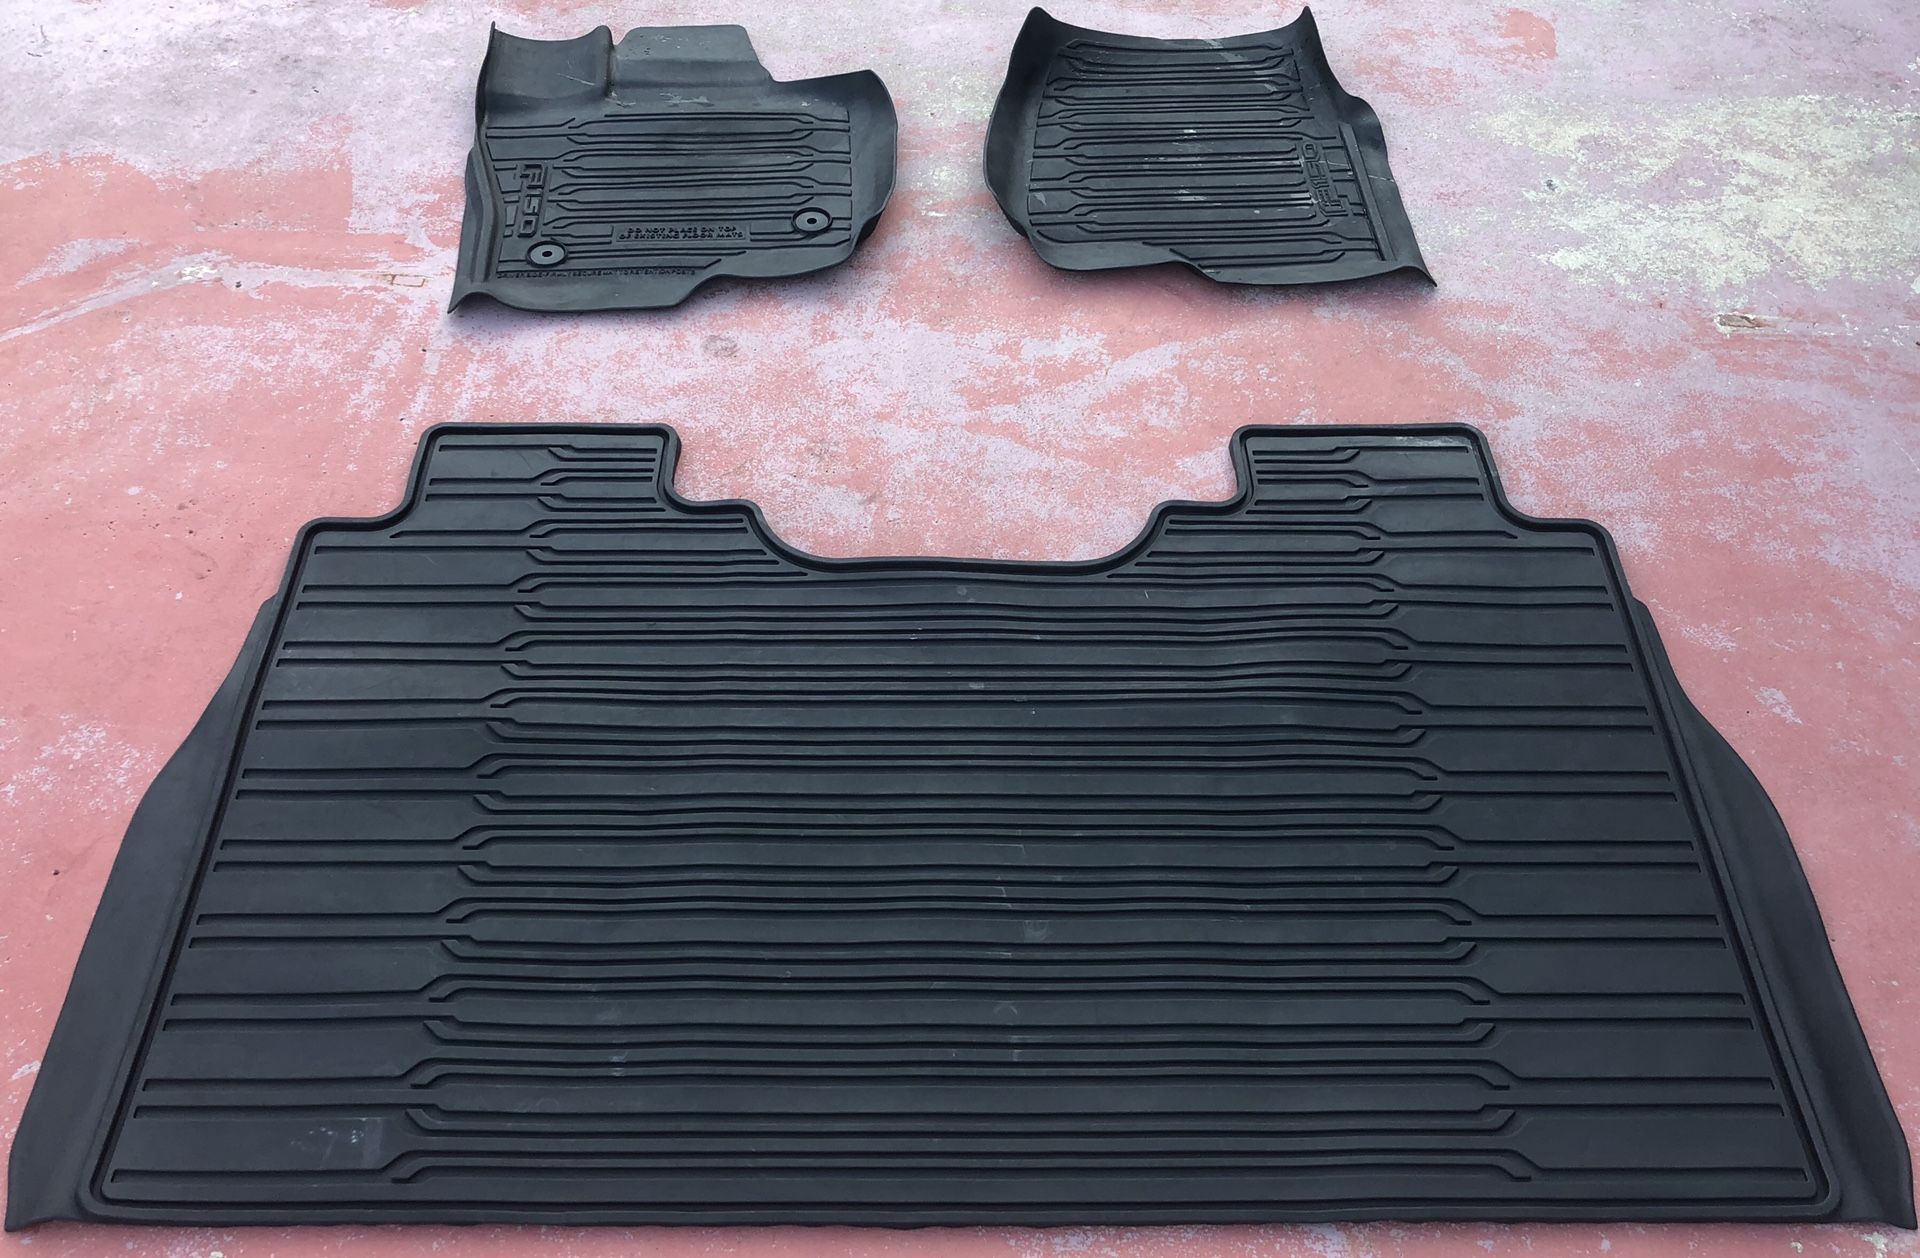 2015 thru 2020 F-150 OEM Genuine Ford Molded Floor Mat Set 3-pc CREW CAB Brand New OEM Genuine Ford Parts from a Ford Dealership